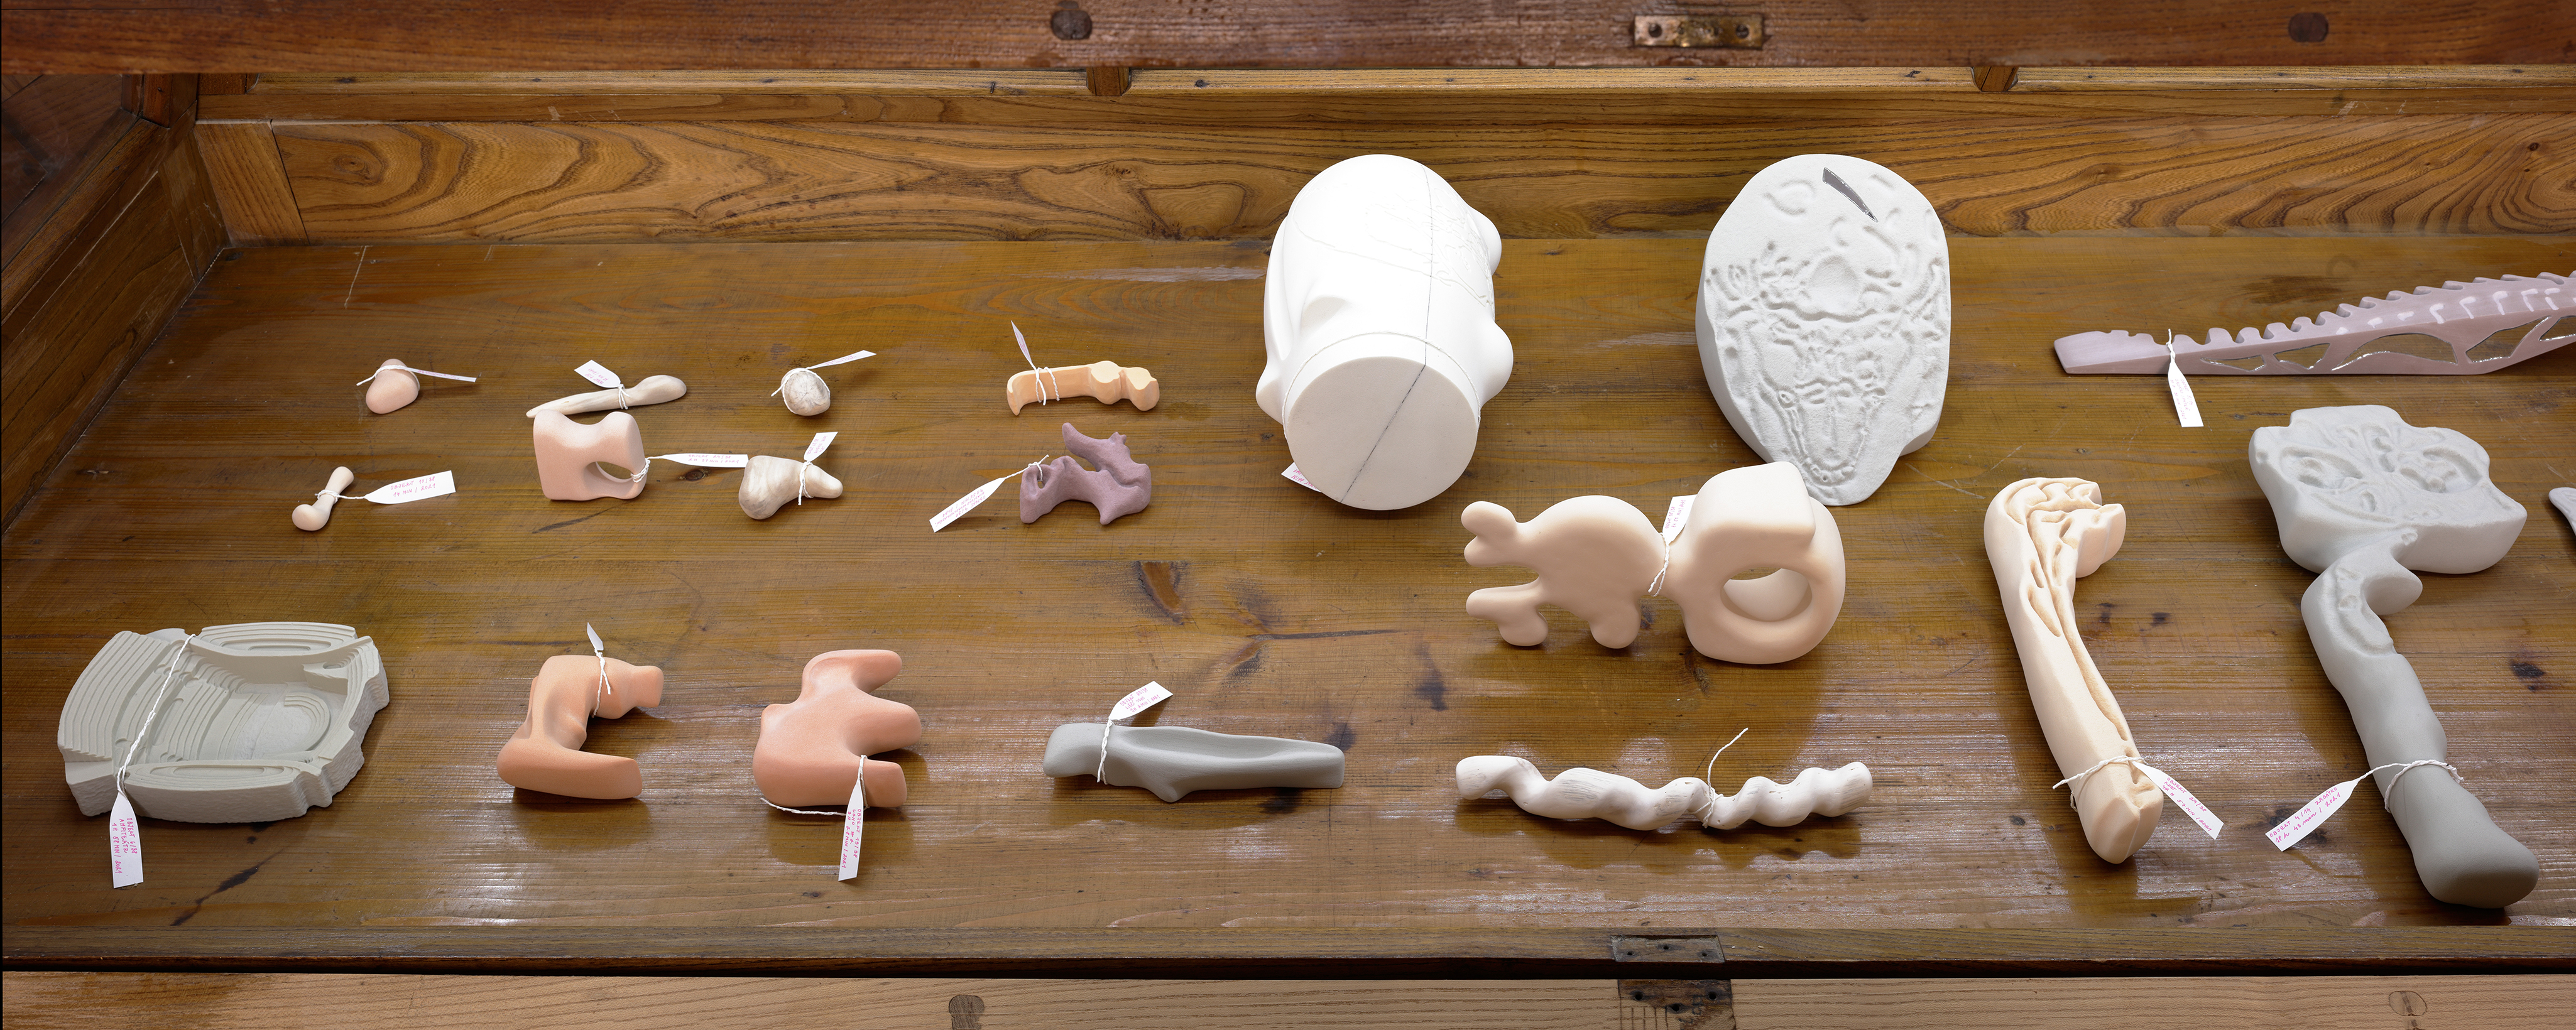 Photo of an art installation called Hands (and Other Products of Labor) 2.0 by Klára Čermáková (Mikulov Art Symposium, Mikulov, Czechia, 2021) [Detail no. 4]. A detailed look at the art objects in one of the “coffins.”